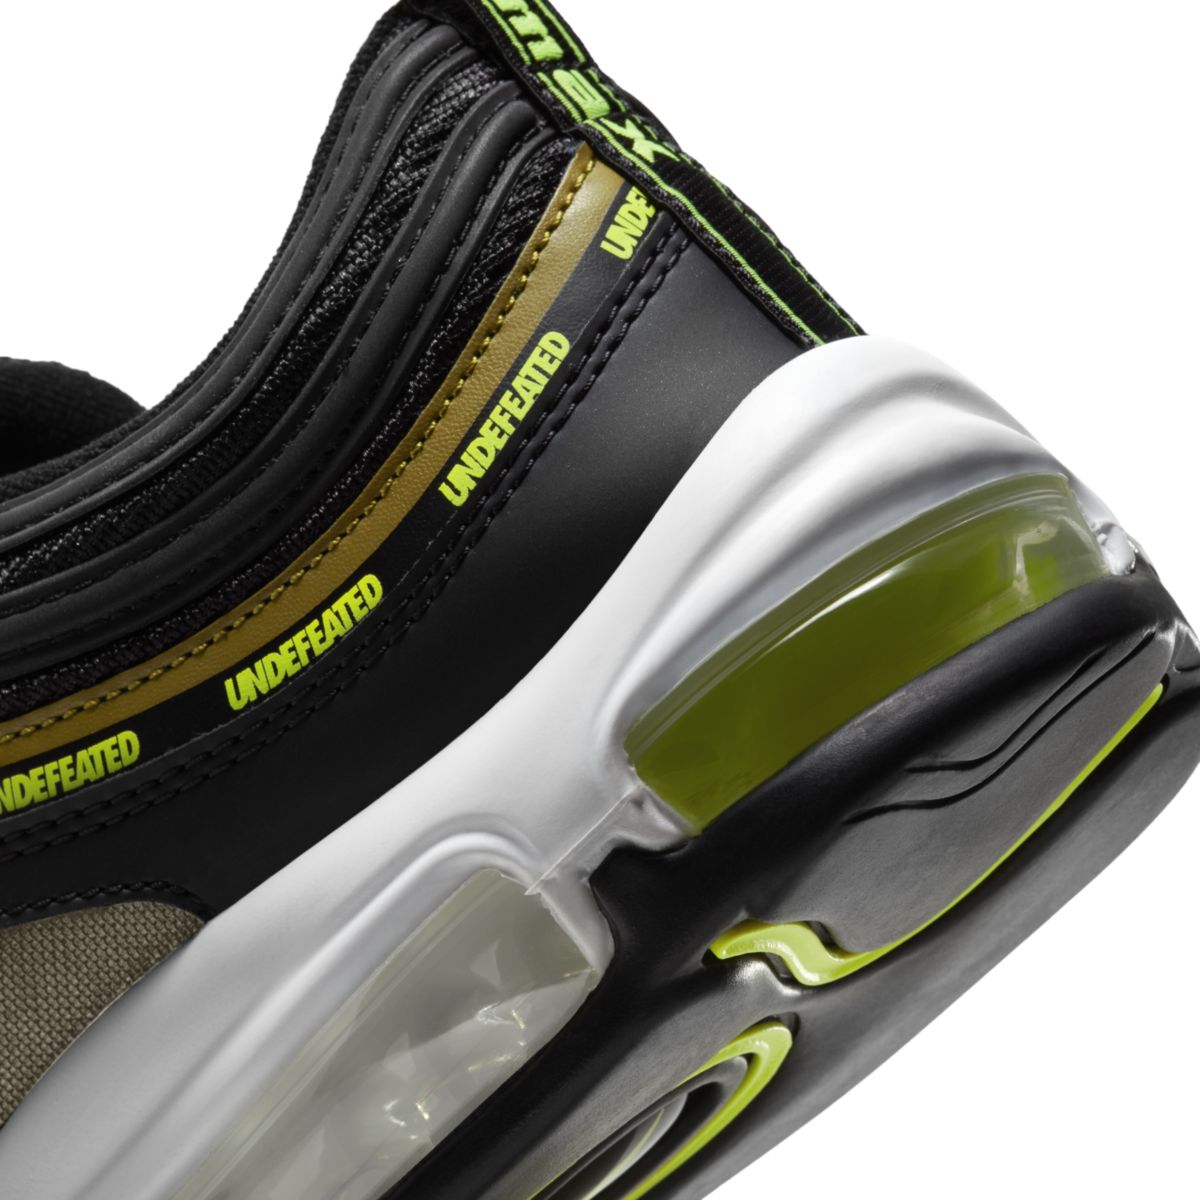 Undefeated x Nike Air Max 97 Black Volt DC4830-001 8